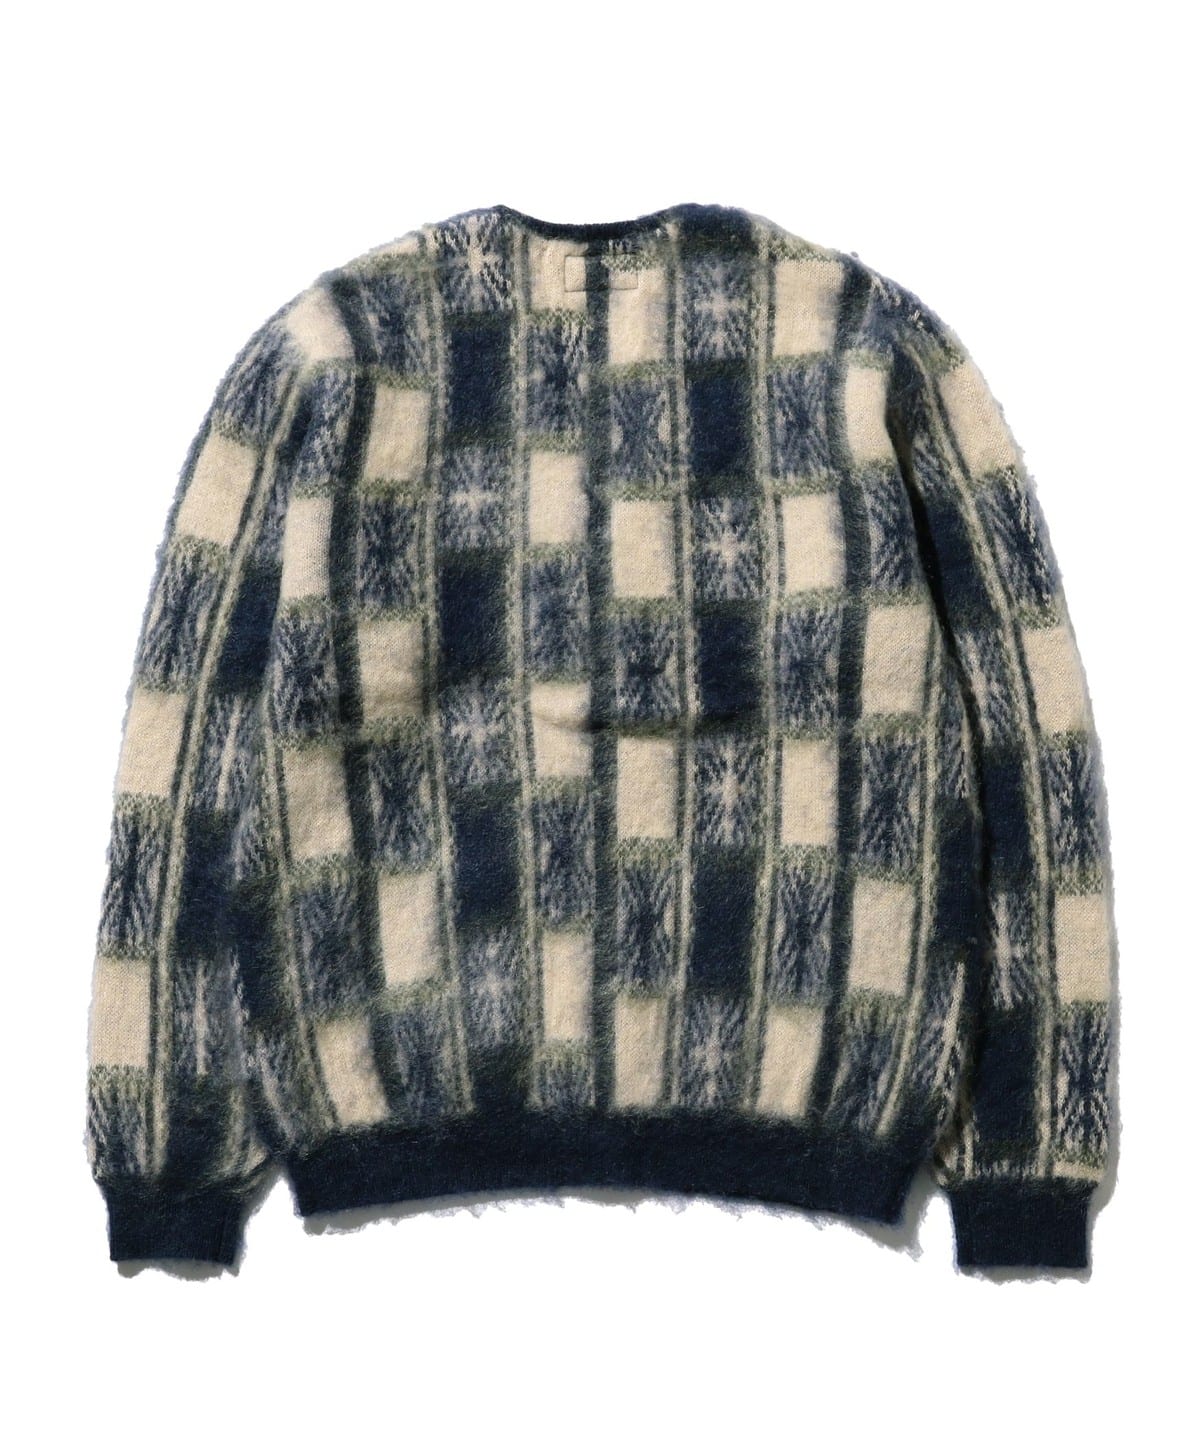 3D Check Jacquard Cardigan - Ready to Wear